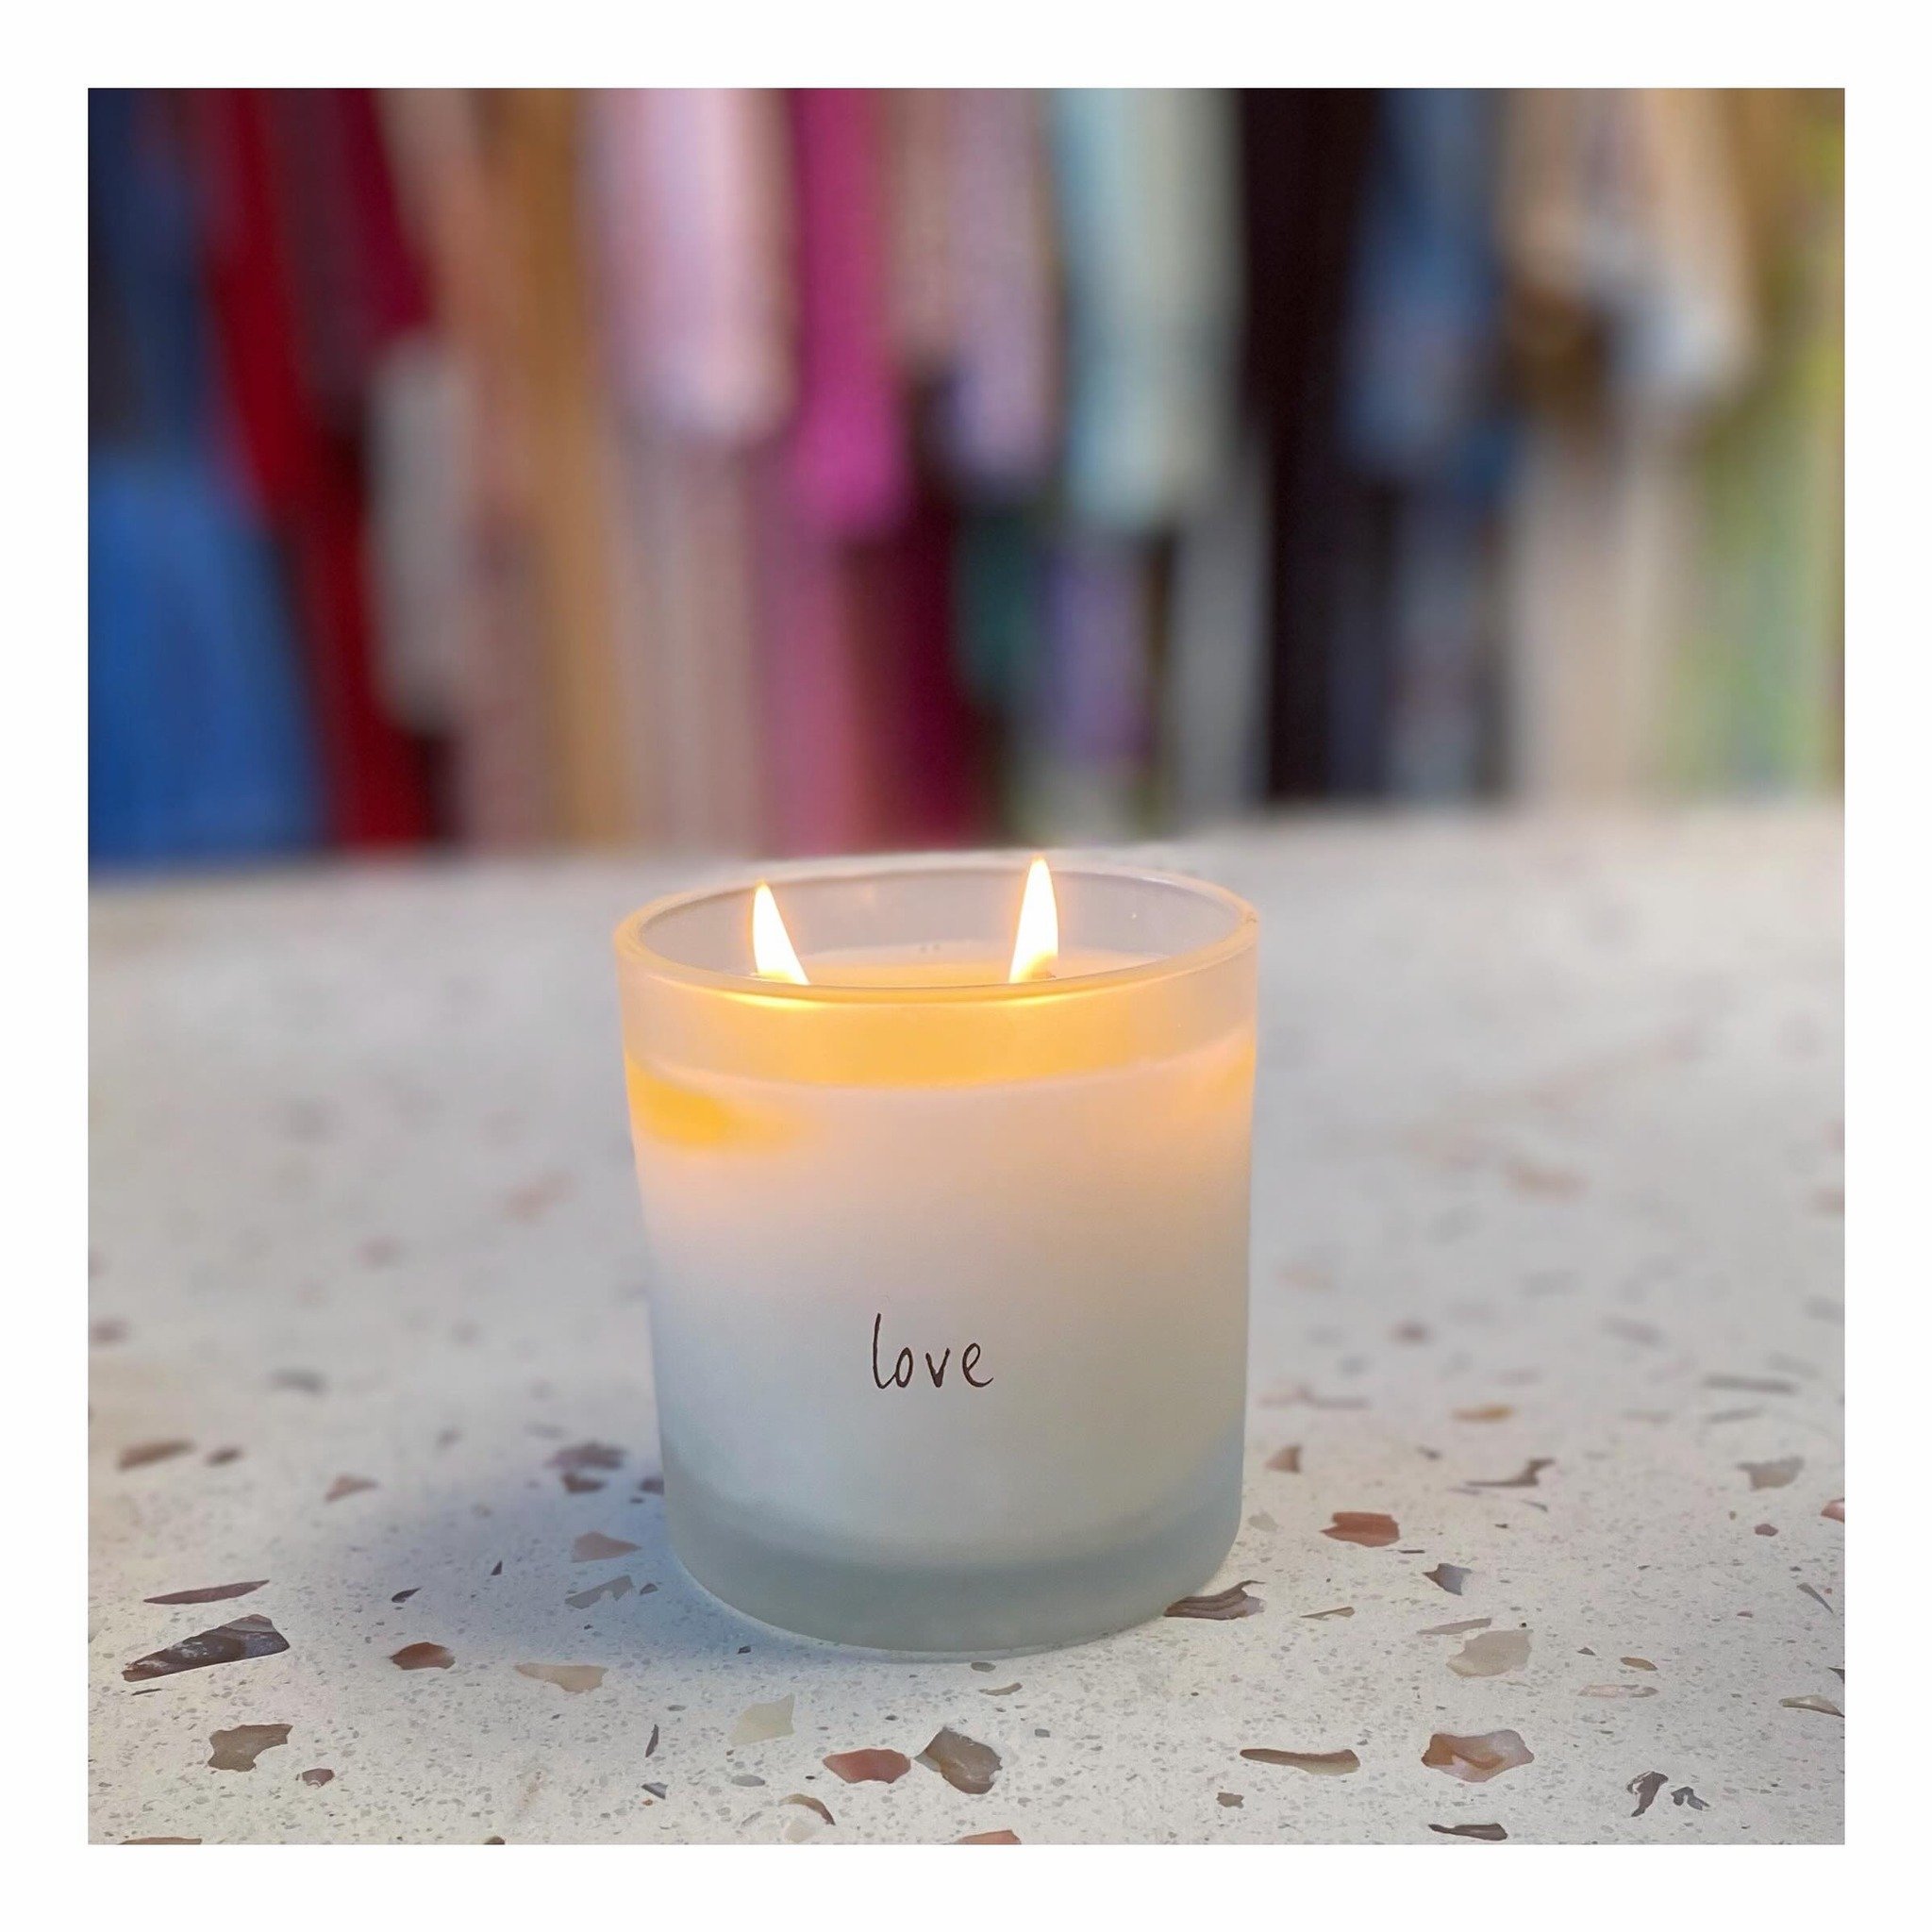 Set your INTENTION &bull; light your CANDLE + change the ENERGY around you!  #peaceloveandwisdom #intentioncandles LOVE ~ tuberose orange coconut + musk double wicked hand poured soy INTENTION CANDLES #setintentions #iloveyou